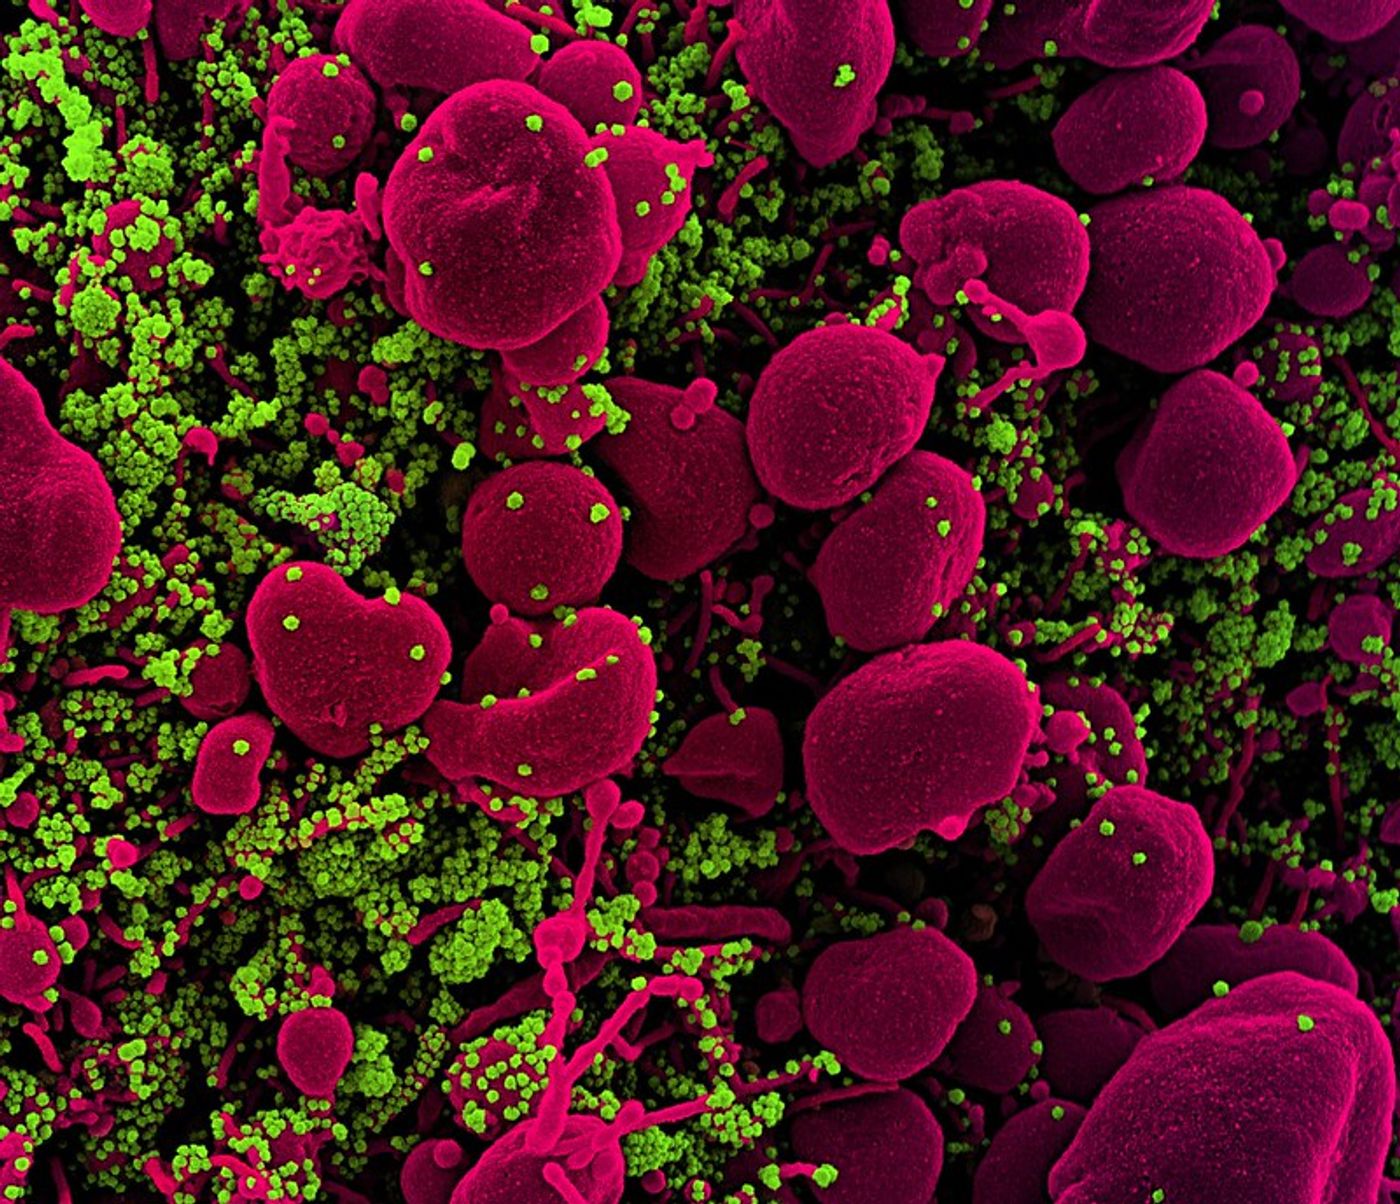 Colorized scanning electron micrograph of an apoptotic cell (pink) heavily infected with SARS-COV-2 virus particles (green), isolated from a patient sample. Image captured at the NIAID Integrated Research Facility (IRF) in Fort Detrick, Maryland. / Credit: NIAID